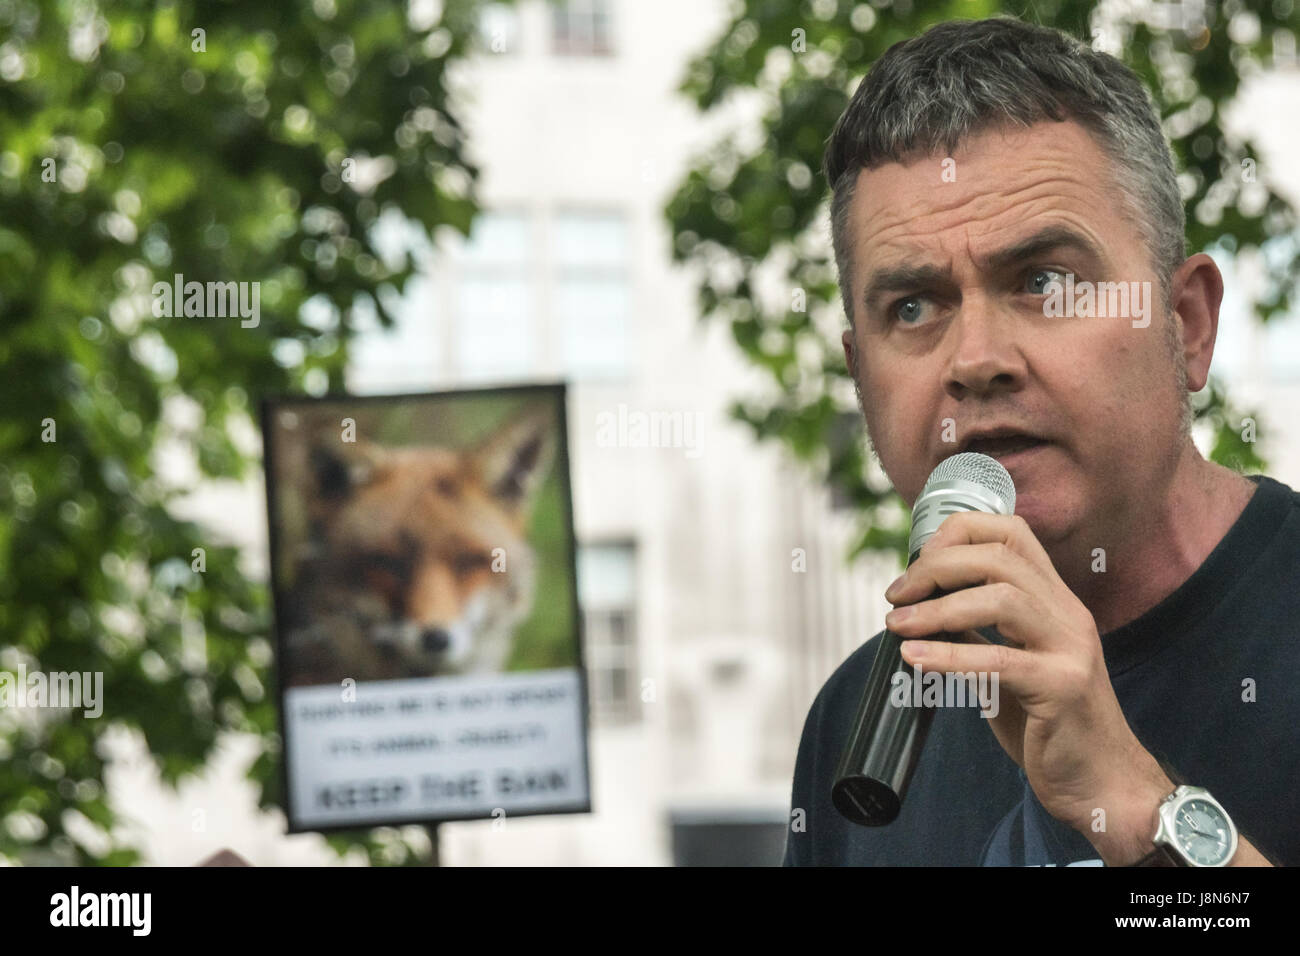 May 29, 2017 - London, UK - London, UK. 29th May 2017. Badger Trust Chief Executive Dominic Dyer speaks to several thousand people at the rally in Cavendish Square before they march to another at Downing St to tell Theresa May that the public are against having a vote in Parliament on the fox hunting bill. Polls show that over 80% of the public in city and rural areas are against lifting the ban and many would support stronger measures and proper enforcement of the 2004 ban. Among those who spoke and marched was Prof Andrew King of the Animal Welfare Party who is standing against Theresa May i Stock Photo